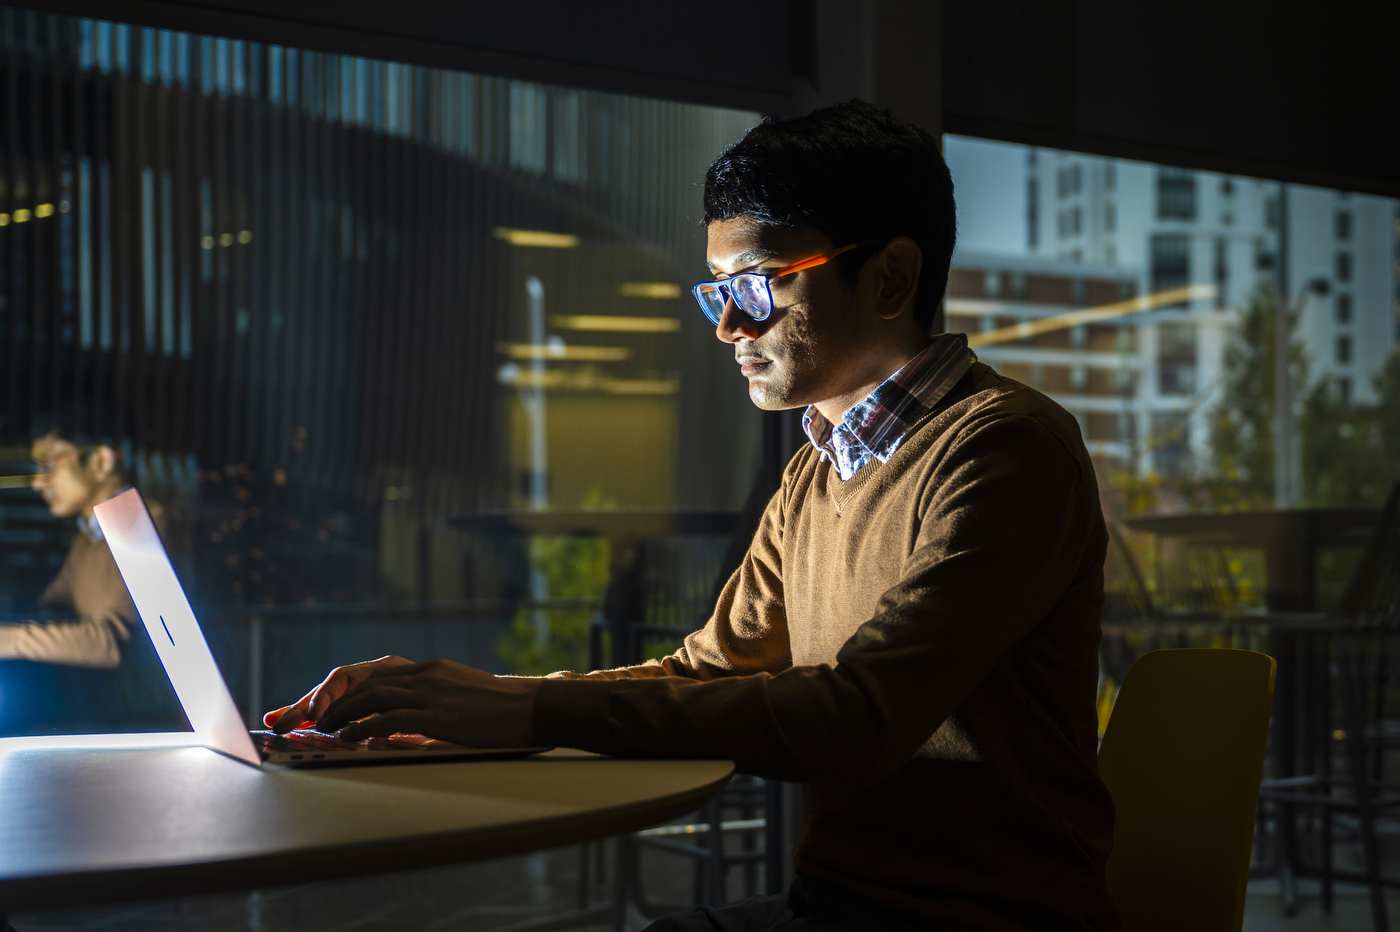 A person sits in front of a brightly lit laptop, studying.